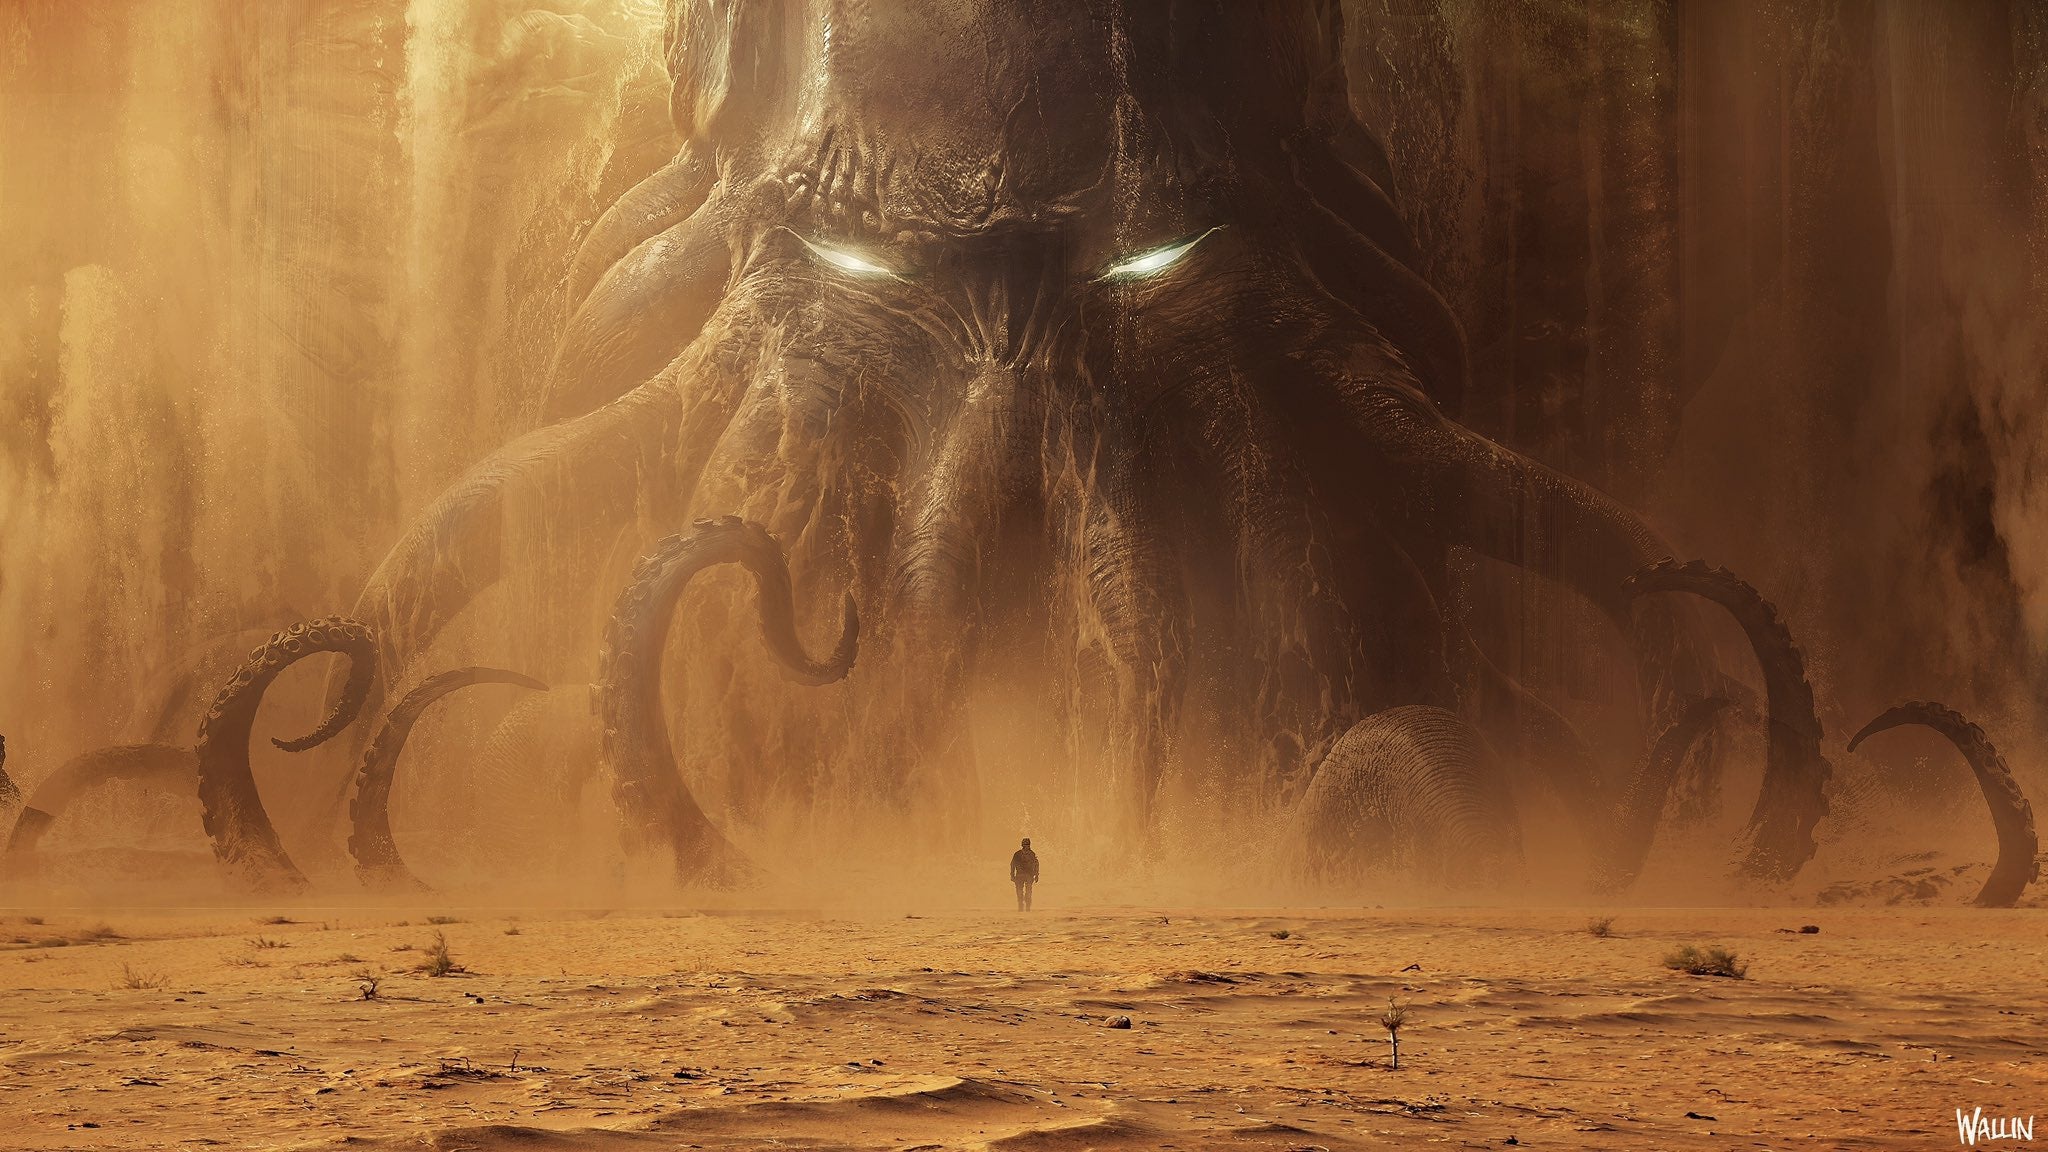 Massive Cthulhu Coming Out Of The Desert by Andree Wallin